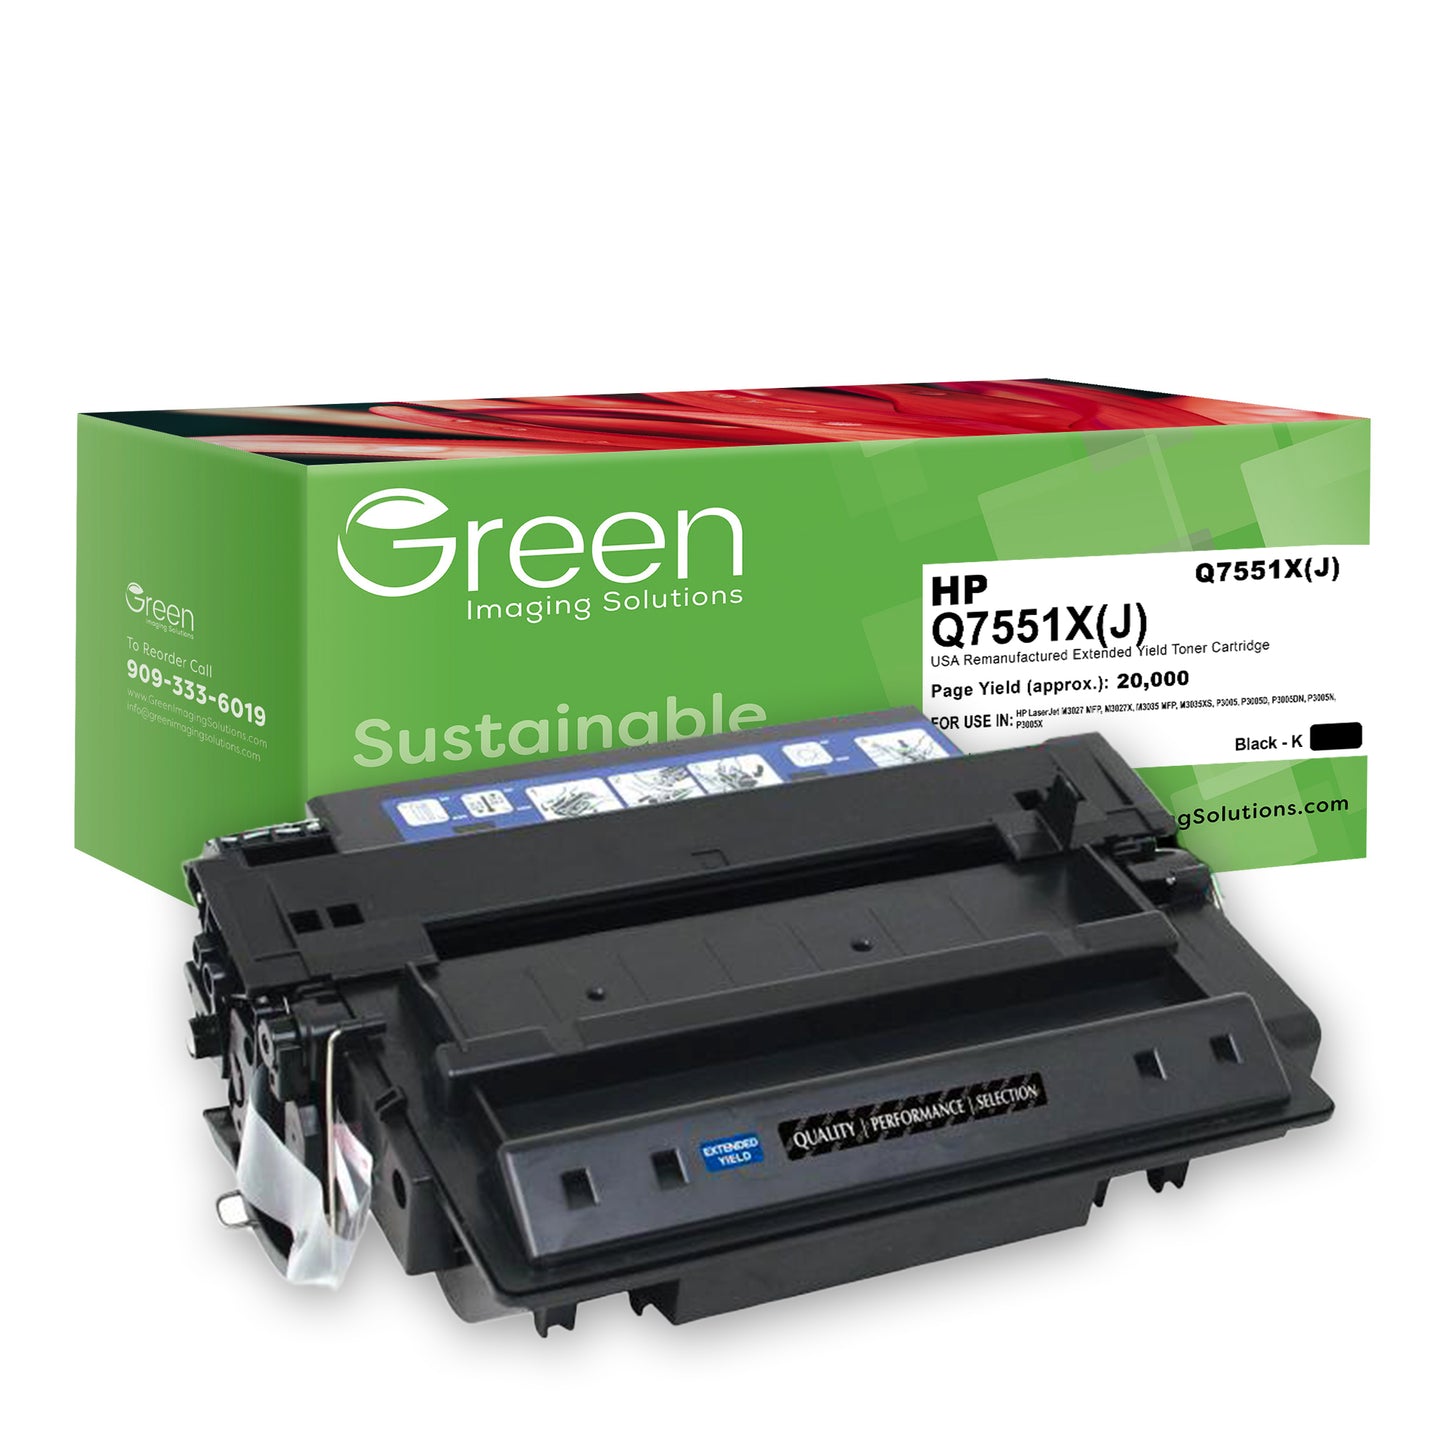 GIS USA Remanufactured Extended Yield Toner Cartridge for HP Q7551X